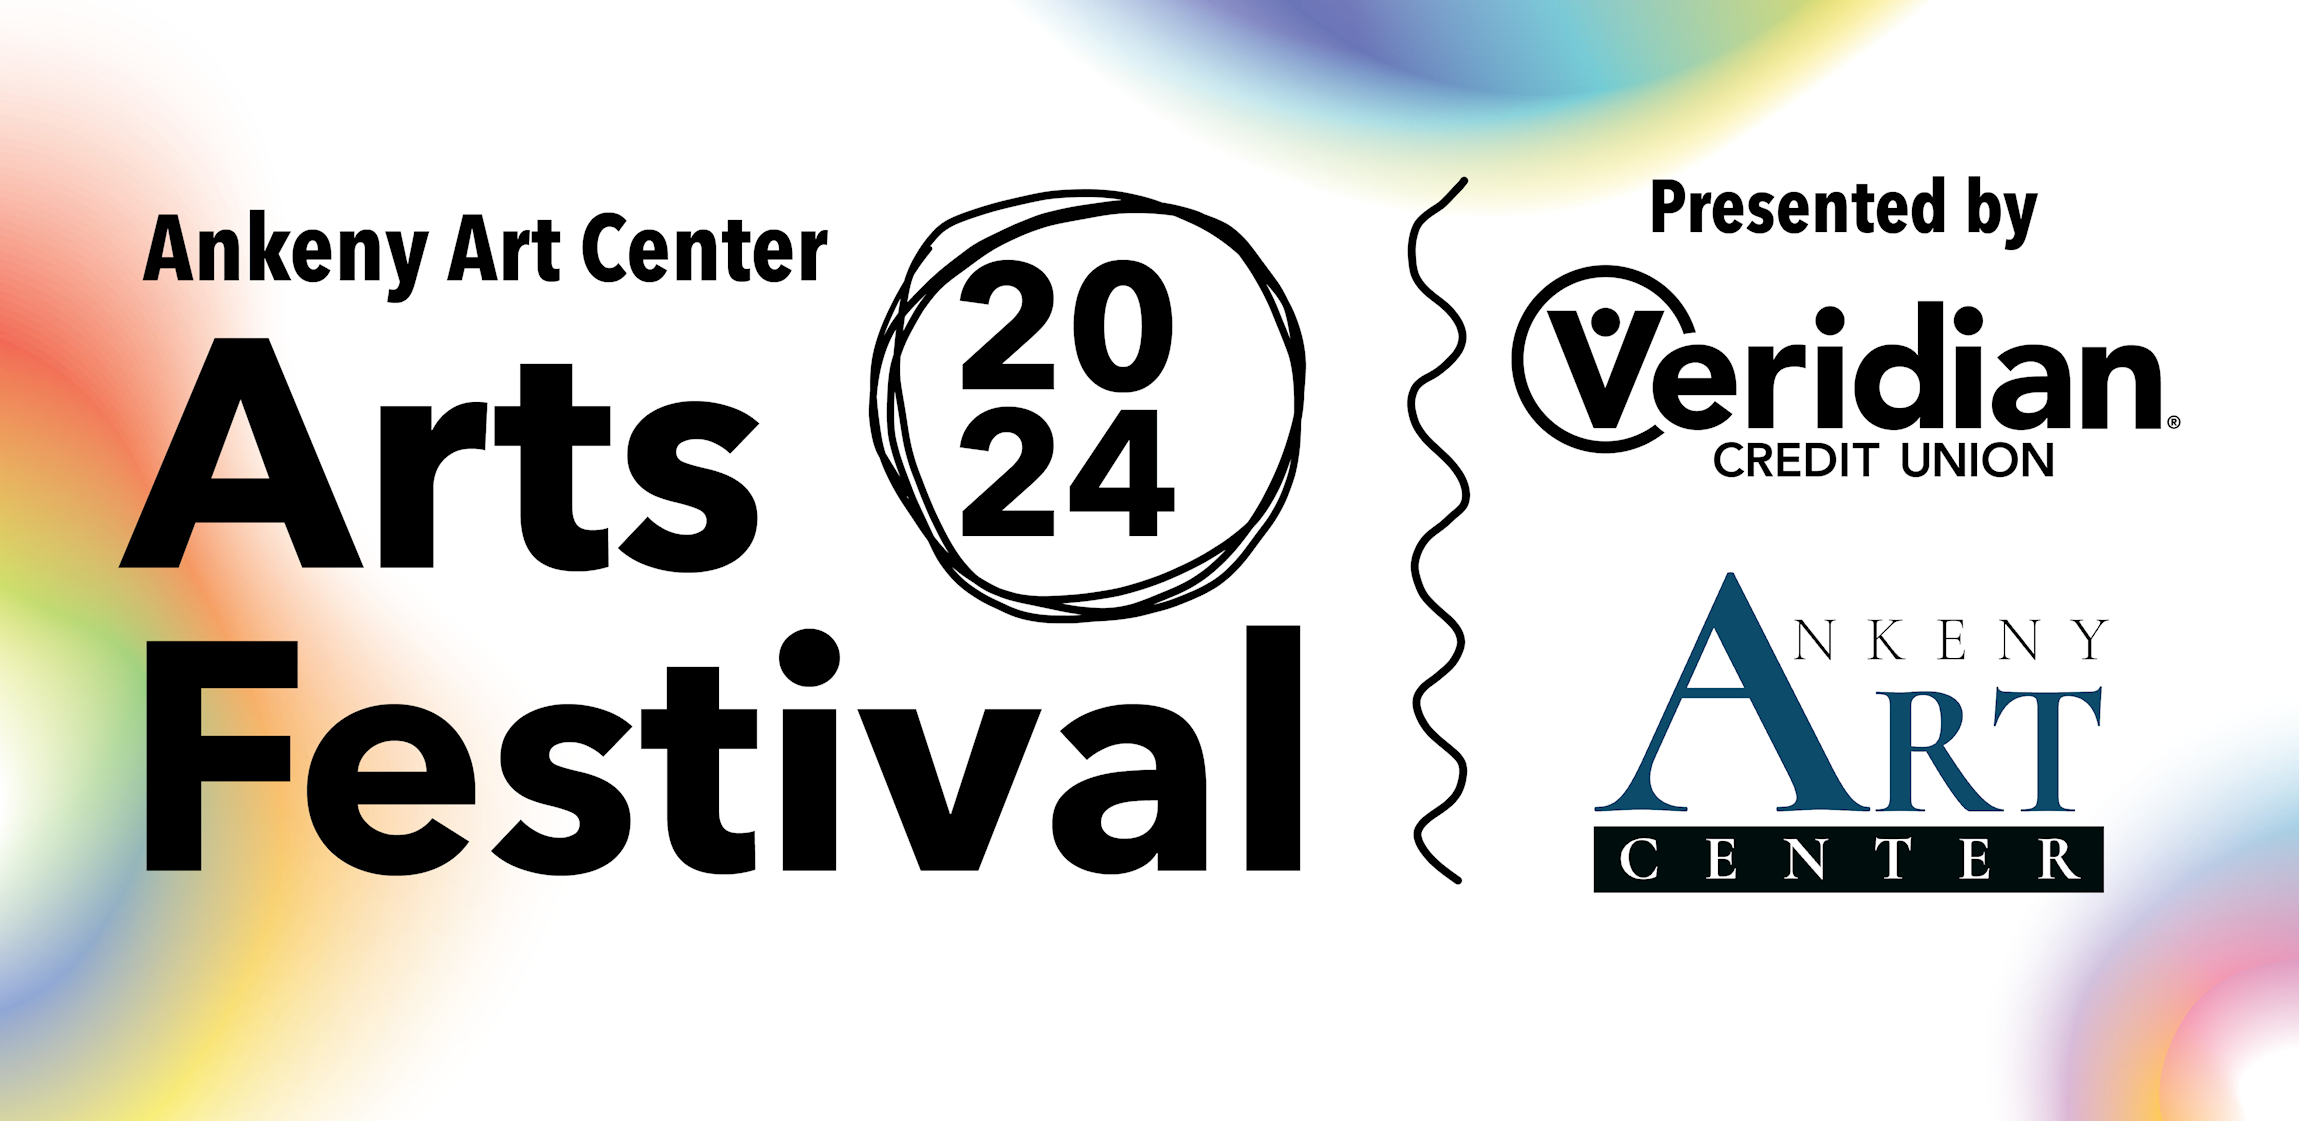 Ankeny Art Center Arts Festival presented by Veridian Credit Union